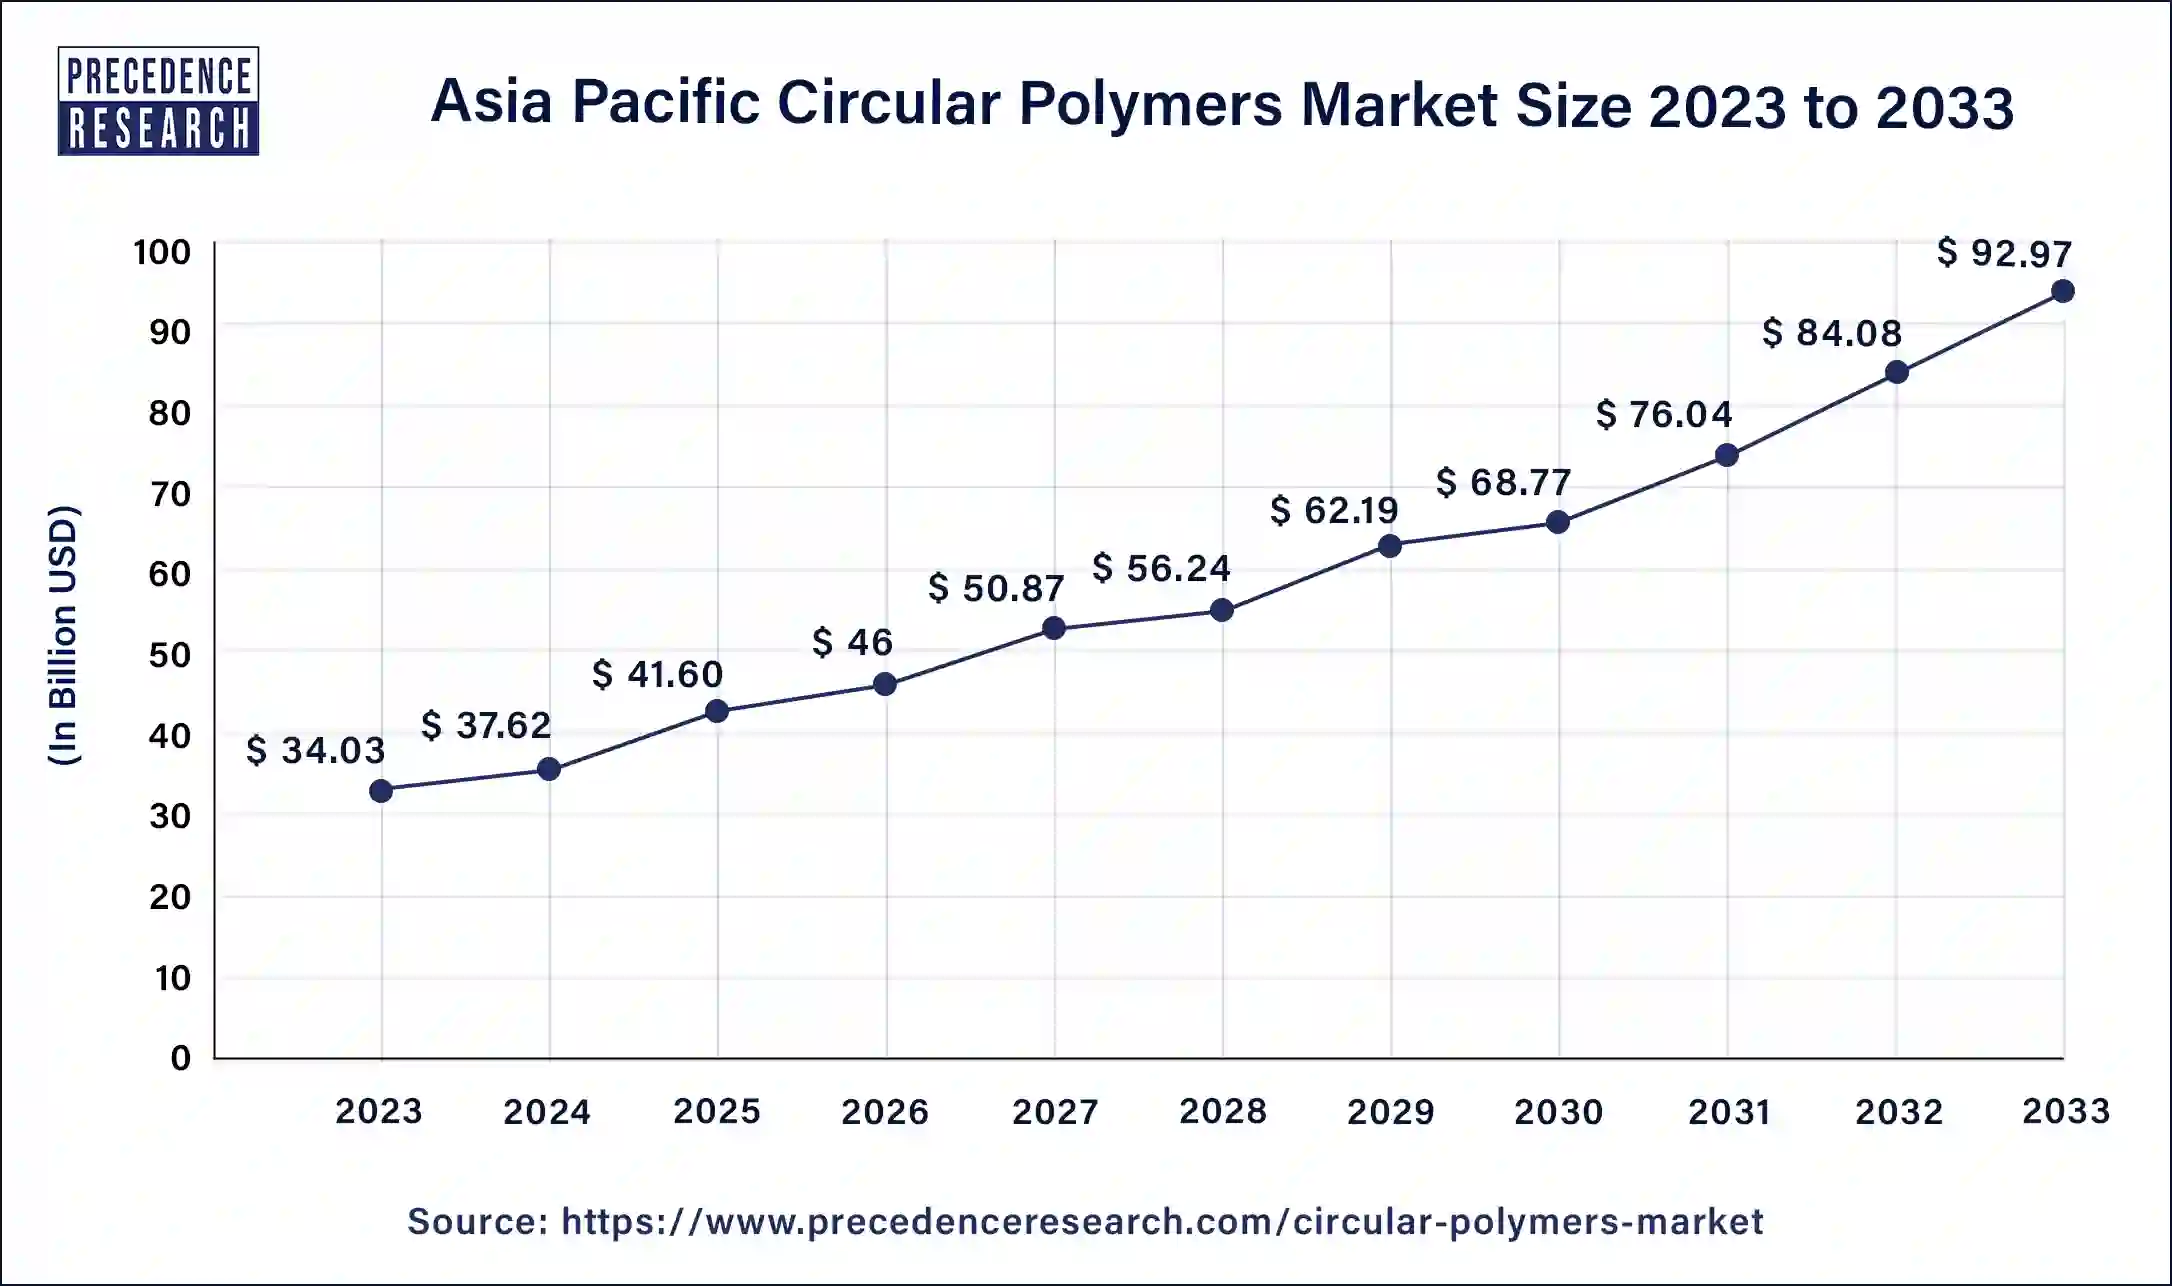 Asia Pacific Circular Polymers Market Size 2024 to 2033